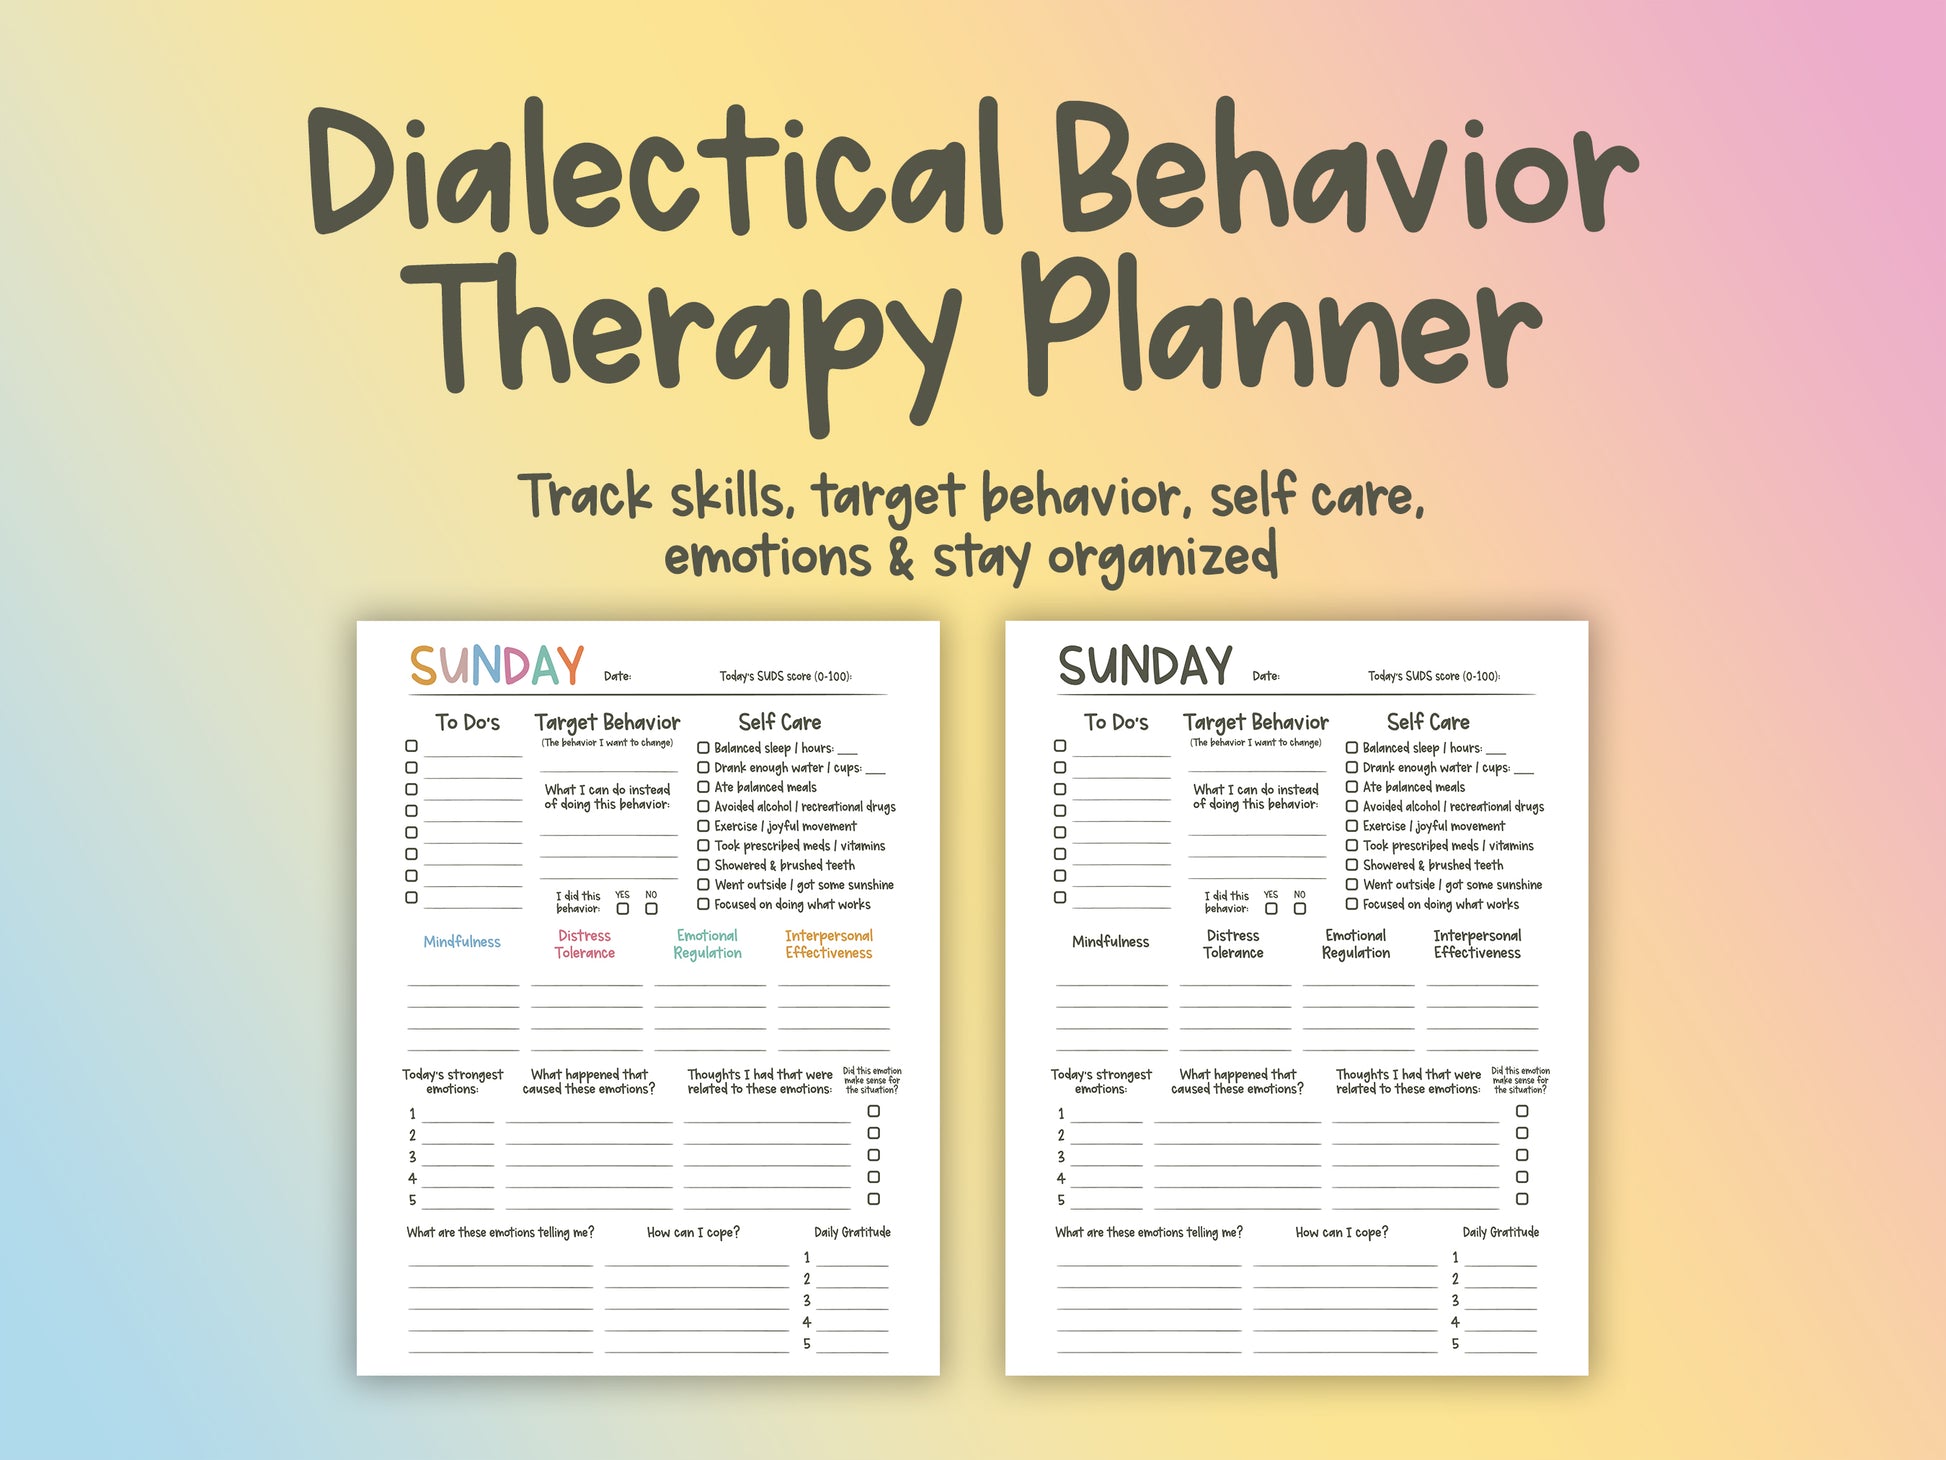  Dialectical Behavior Therapy Planner